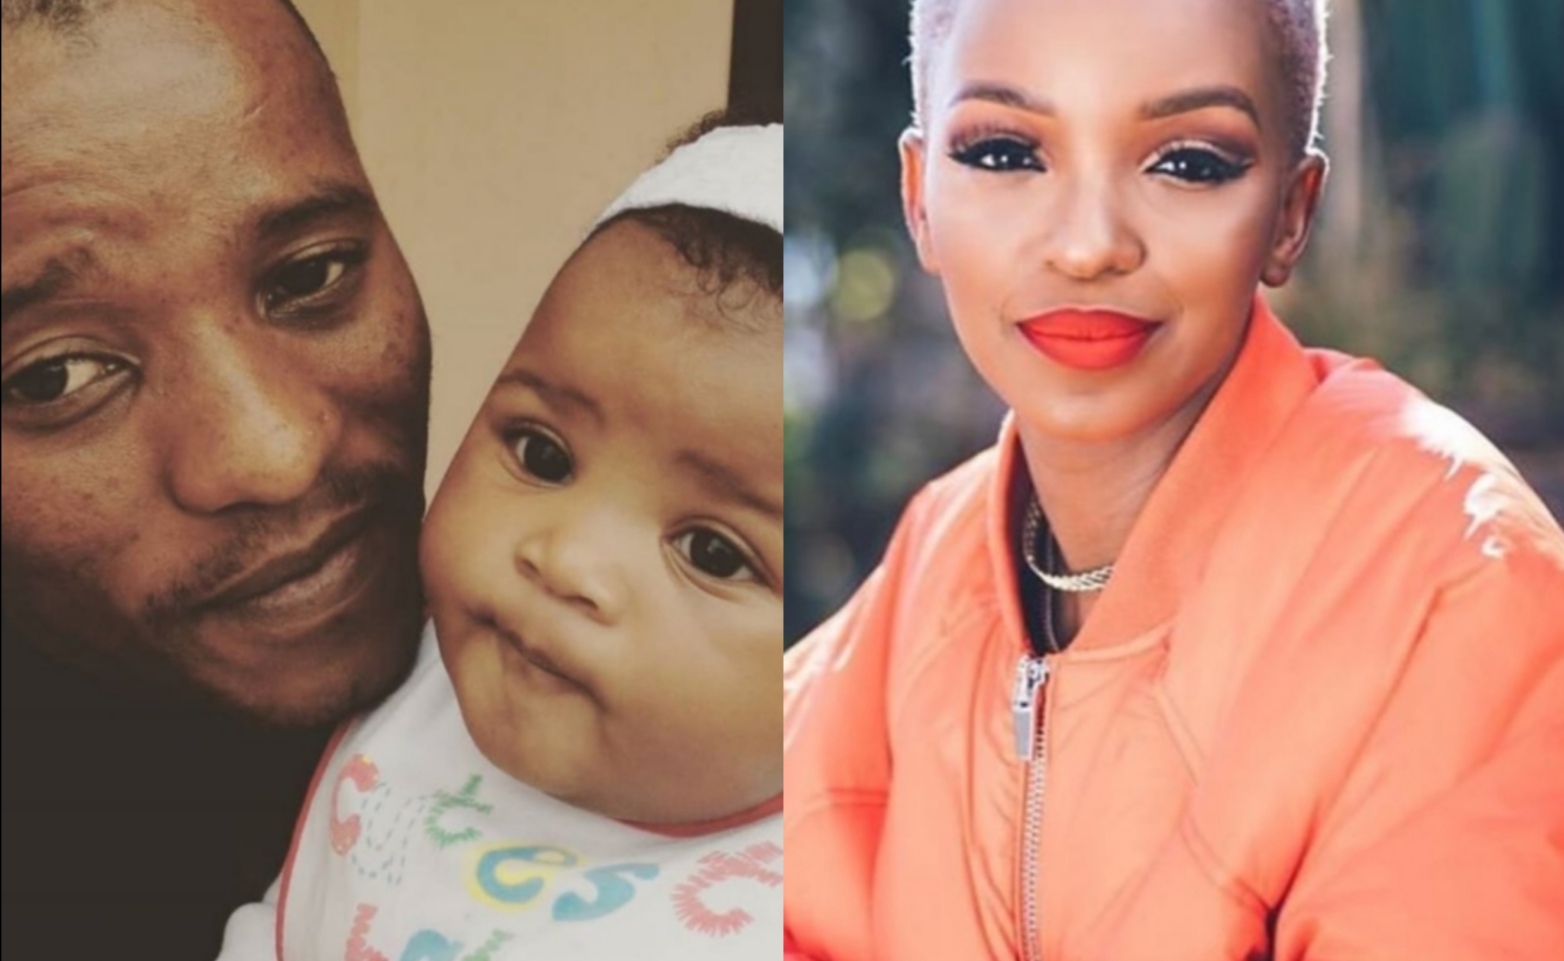 Nandi Madida Offers To Help Abdul Khoza Fight To See His Daughter Again